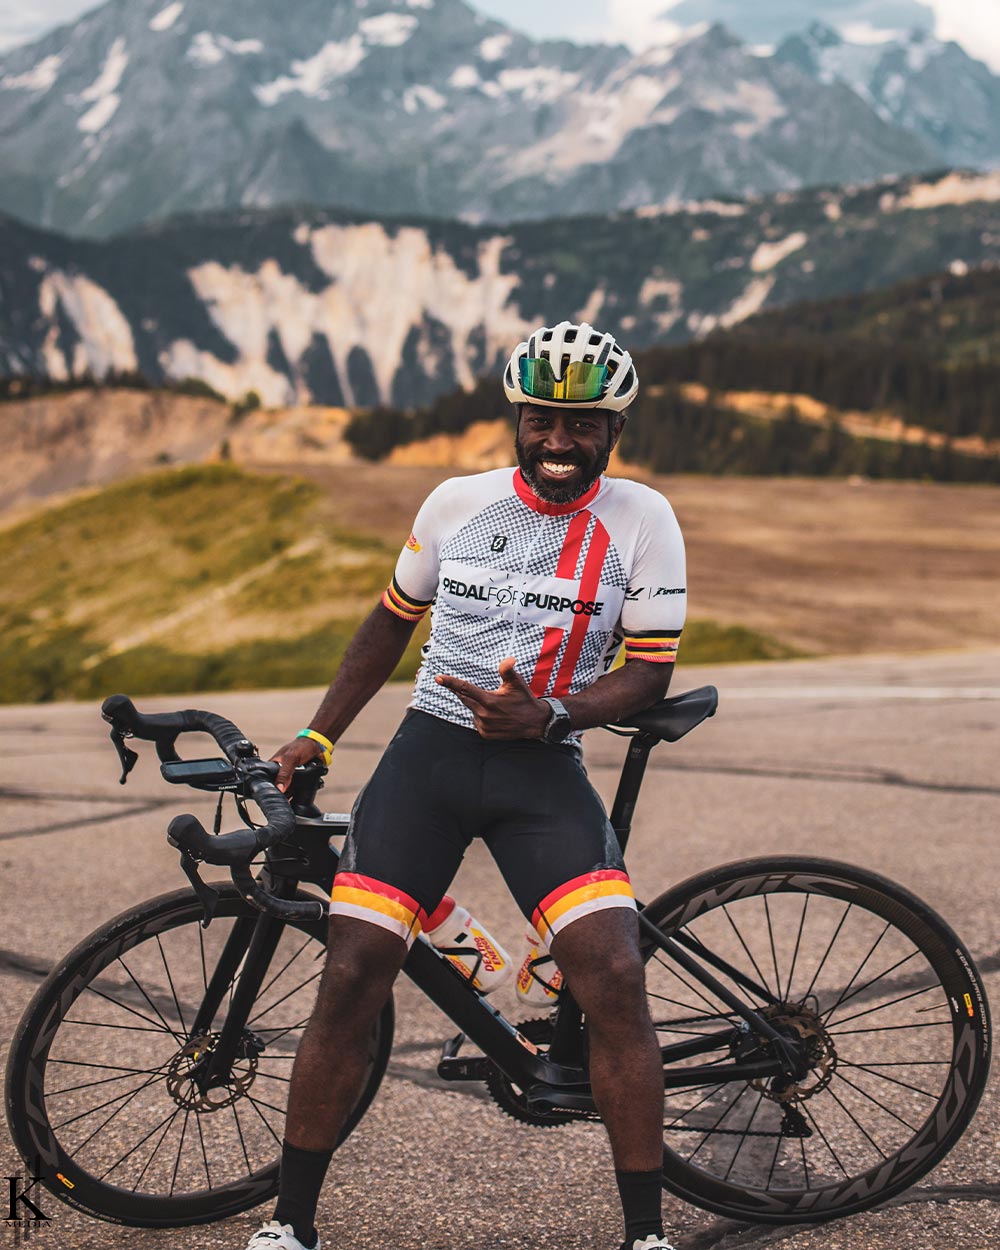 Muyambi, wearing his helmet and biking gear, smiles while leisurely leaning on his bike, hills and mountain peaks fill the distant landscape